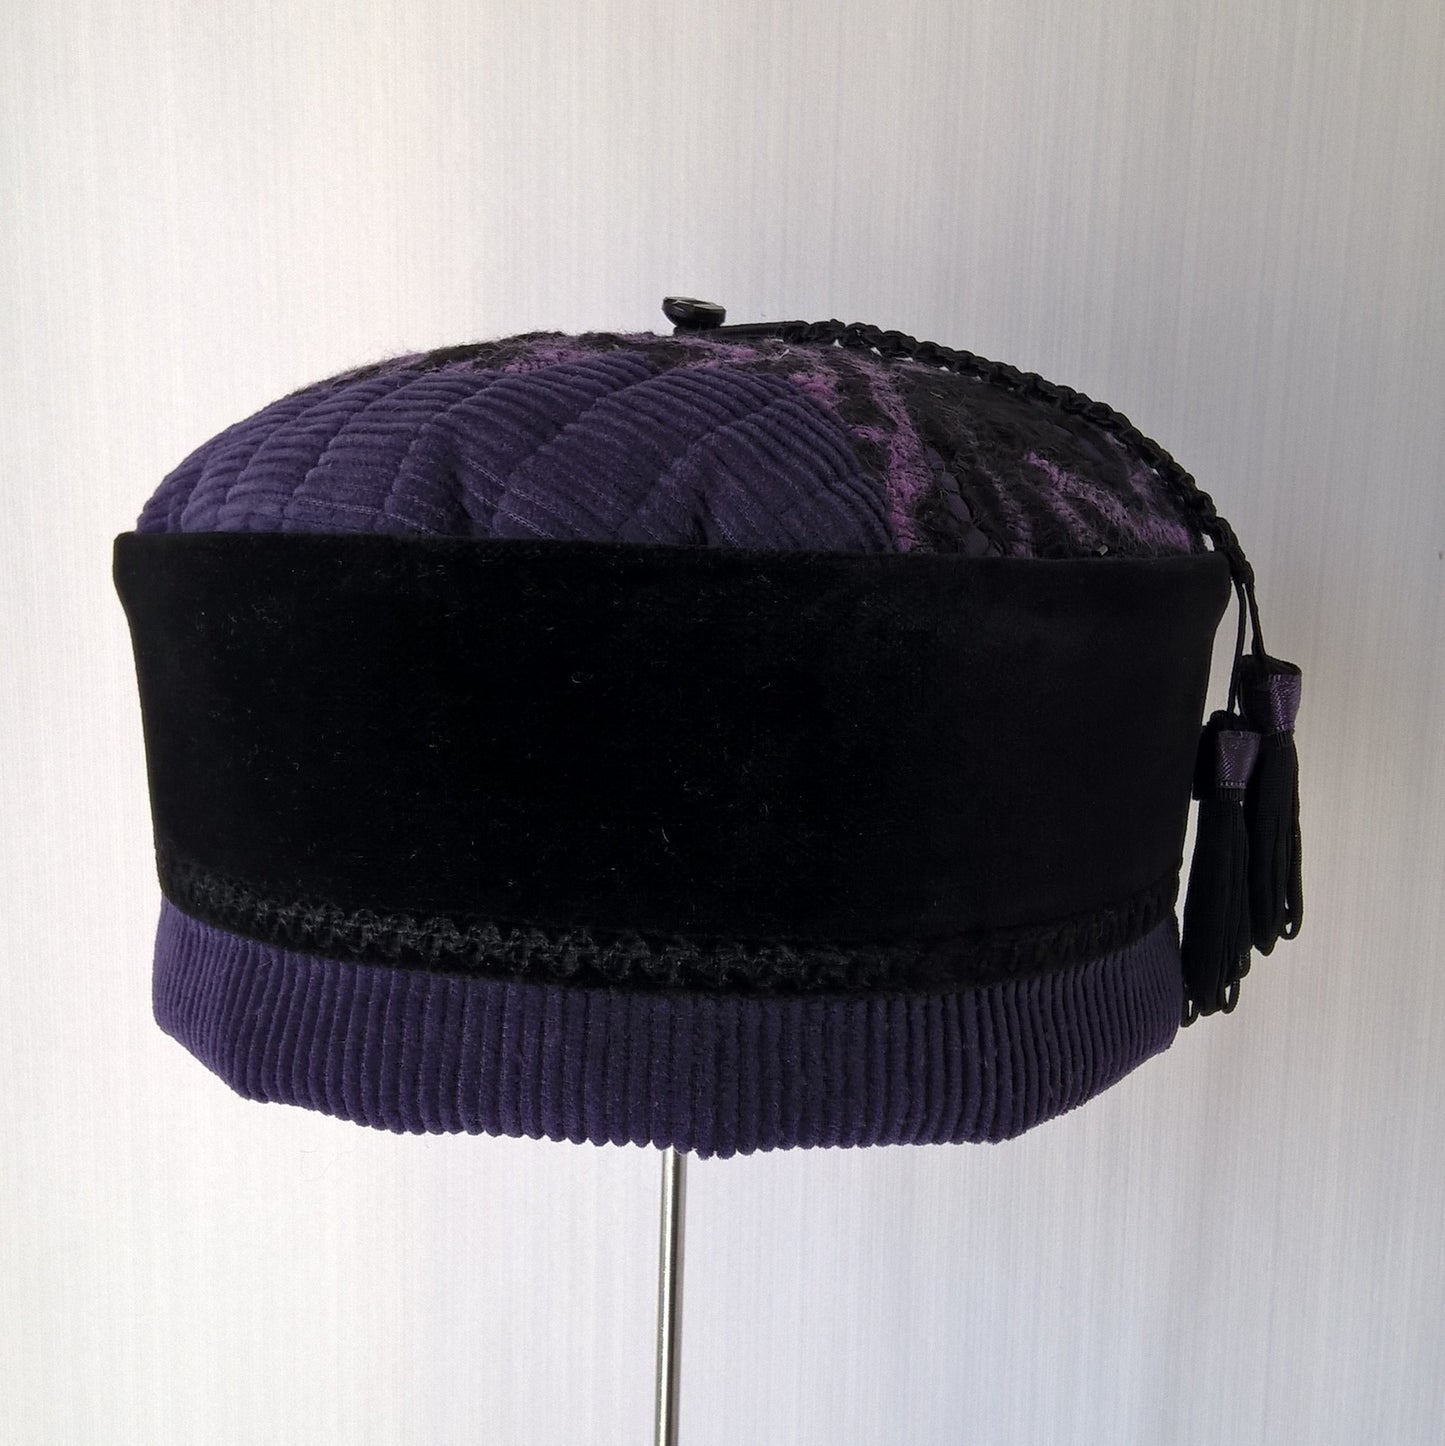 Velvet and corduroy Gothic style pillbox hat, handmade in purple and black with removable macrame tassel